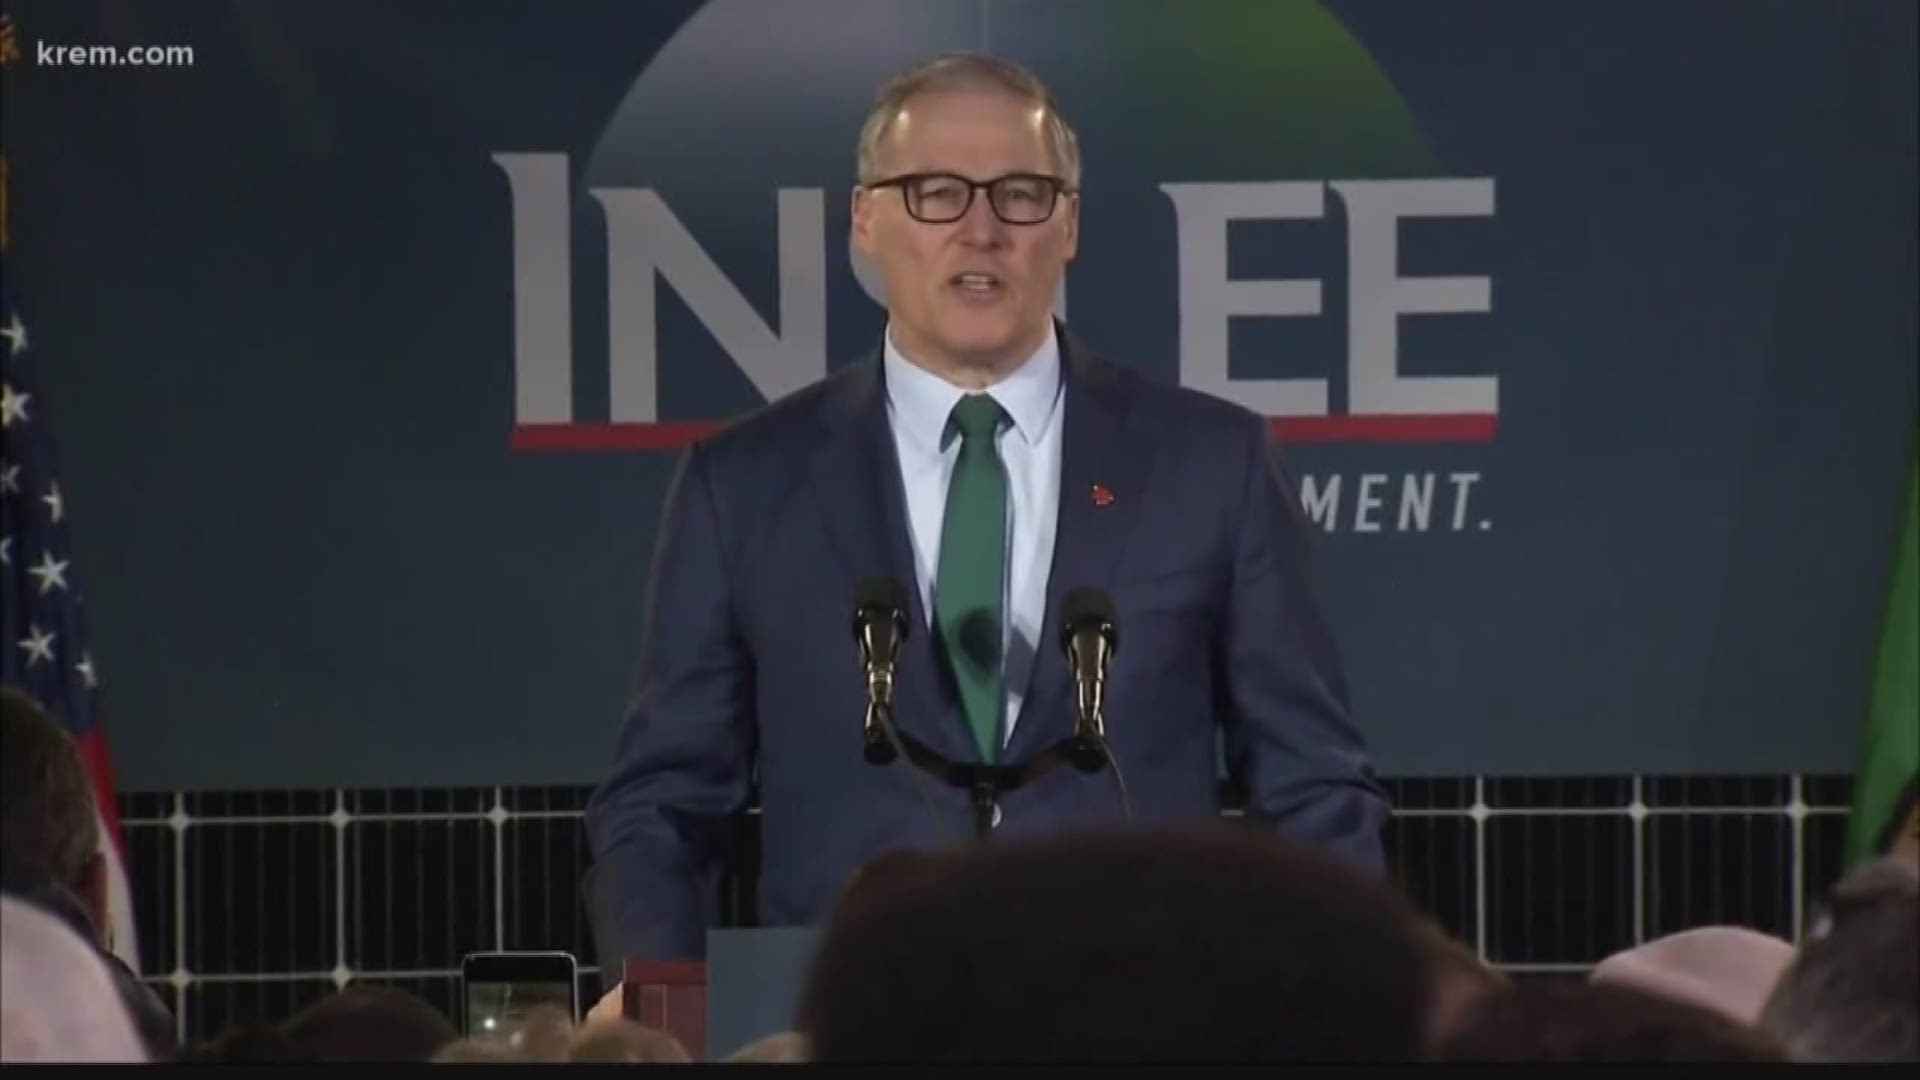 WA Gov. Jay Inslee announced he is running for president in 2020 as a democrat. How has that gone for other politicians from the Northwest?